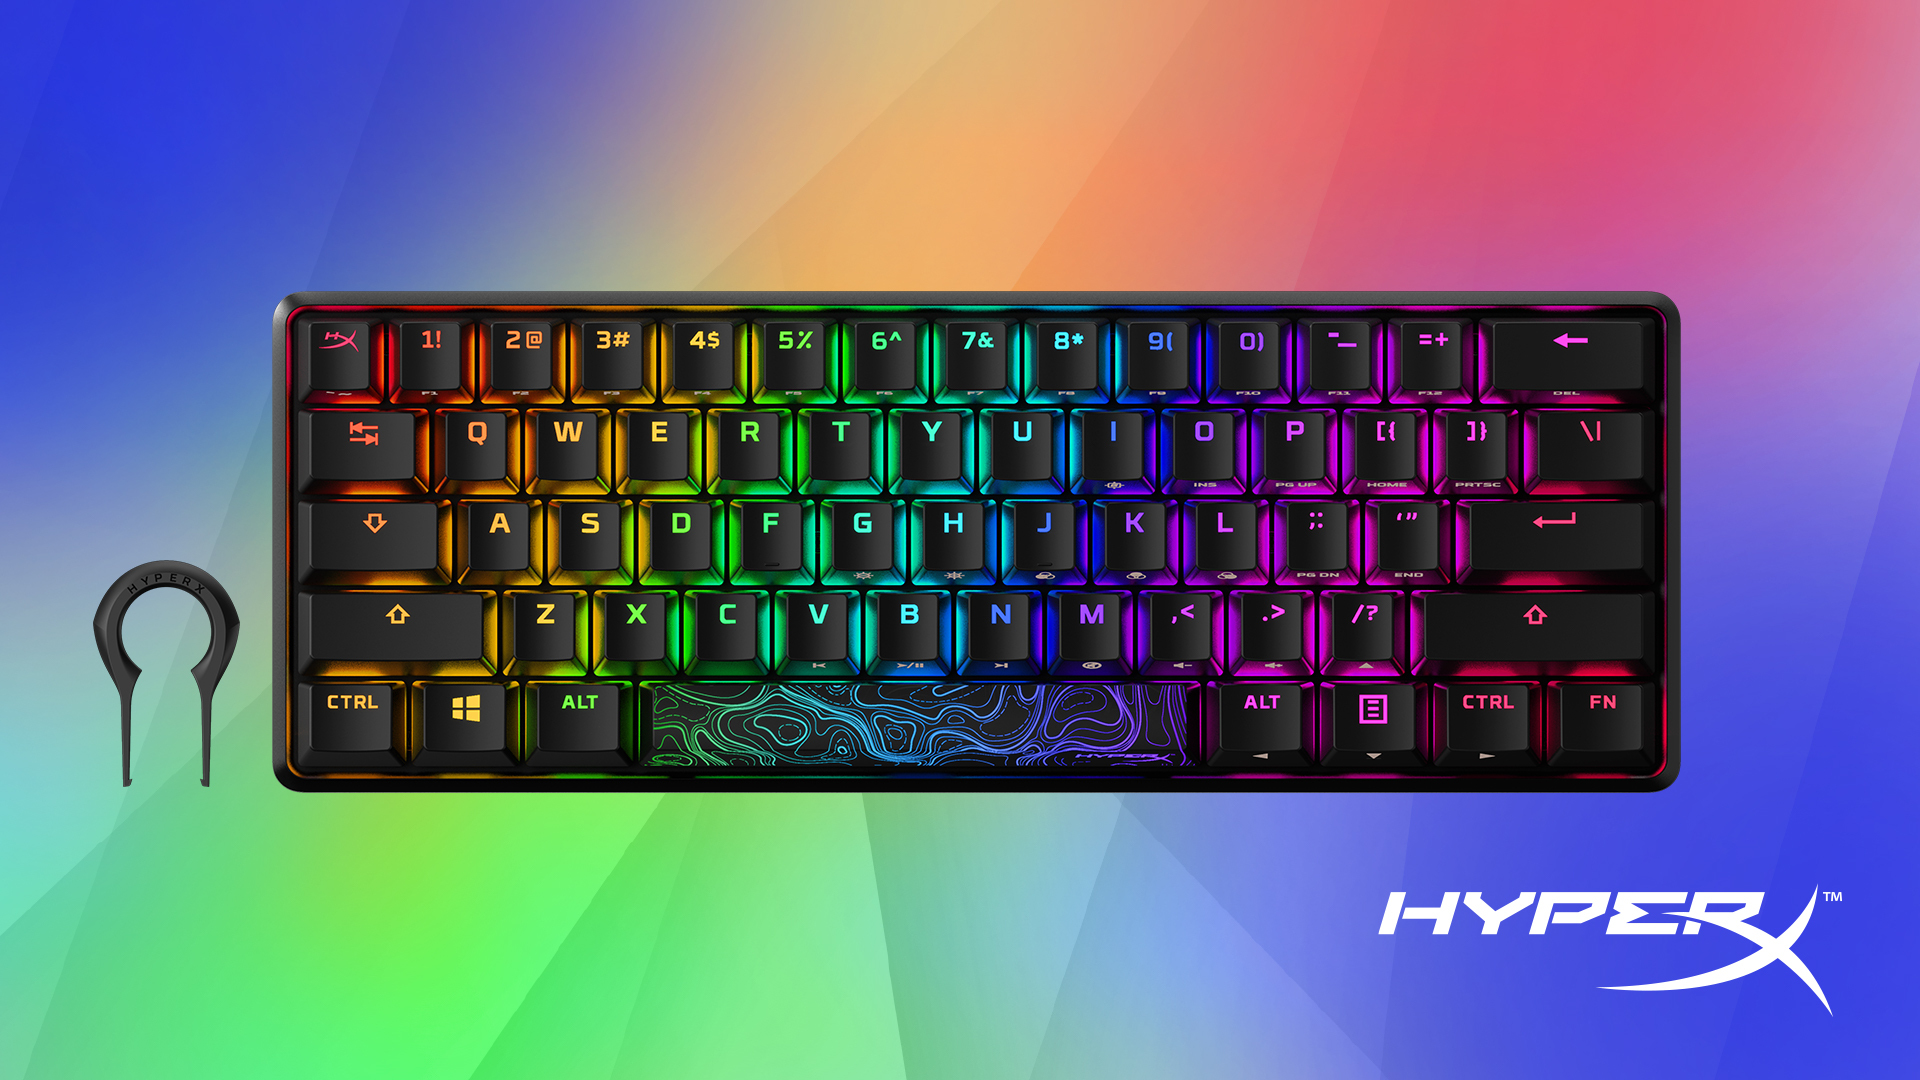 HyperX Reveals New Products at CES 2021; Includes 60 Percent Keyboard and More